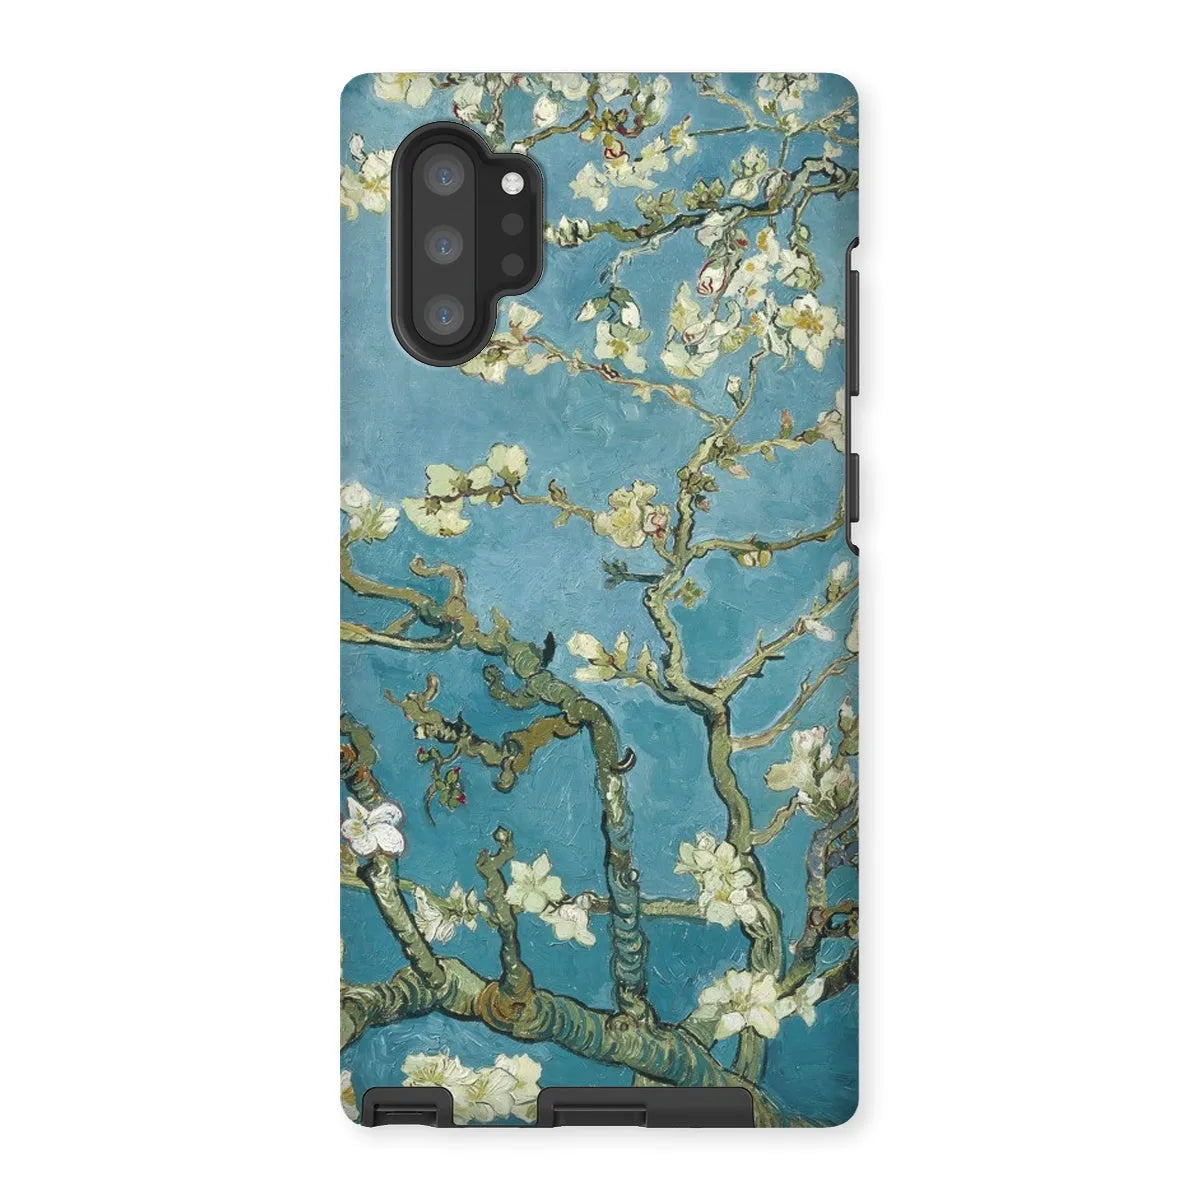 Almond Blossom - Vincent Van Gogh Aesthetic Phone Case - Samsung Galaxy Note 10p / Matte - Mobile Phone Cases